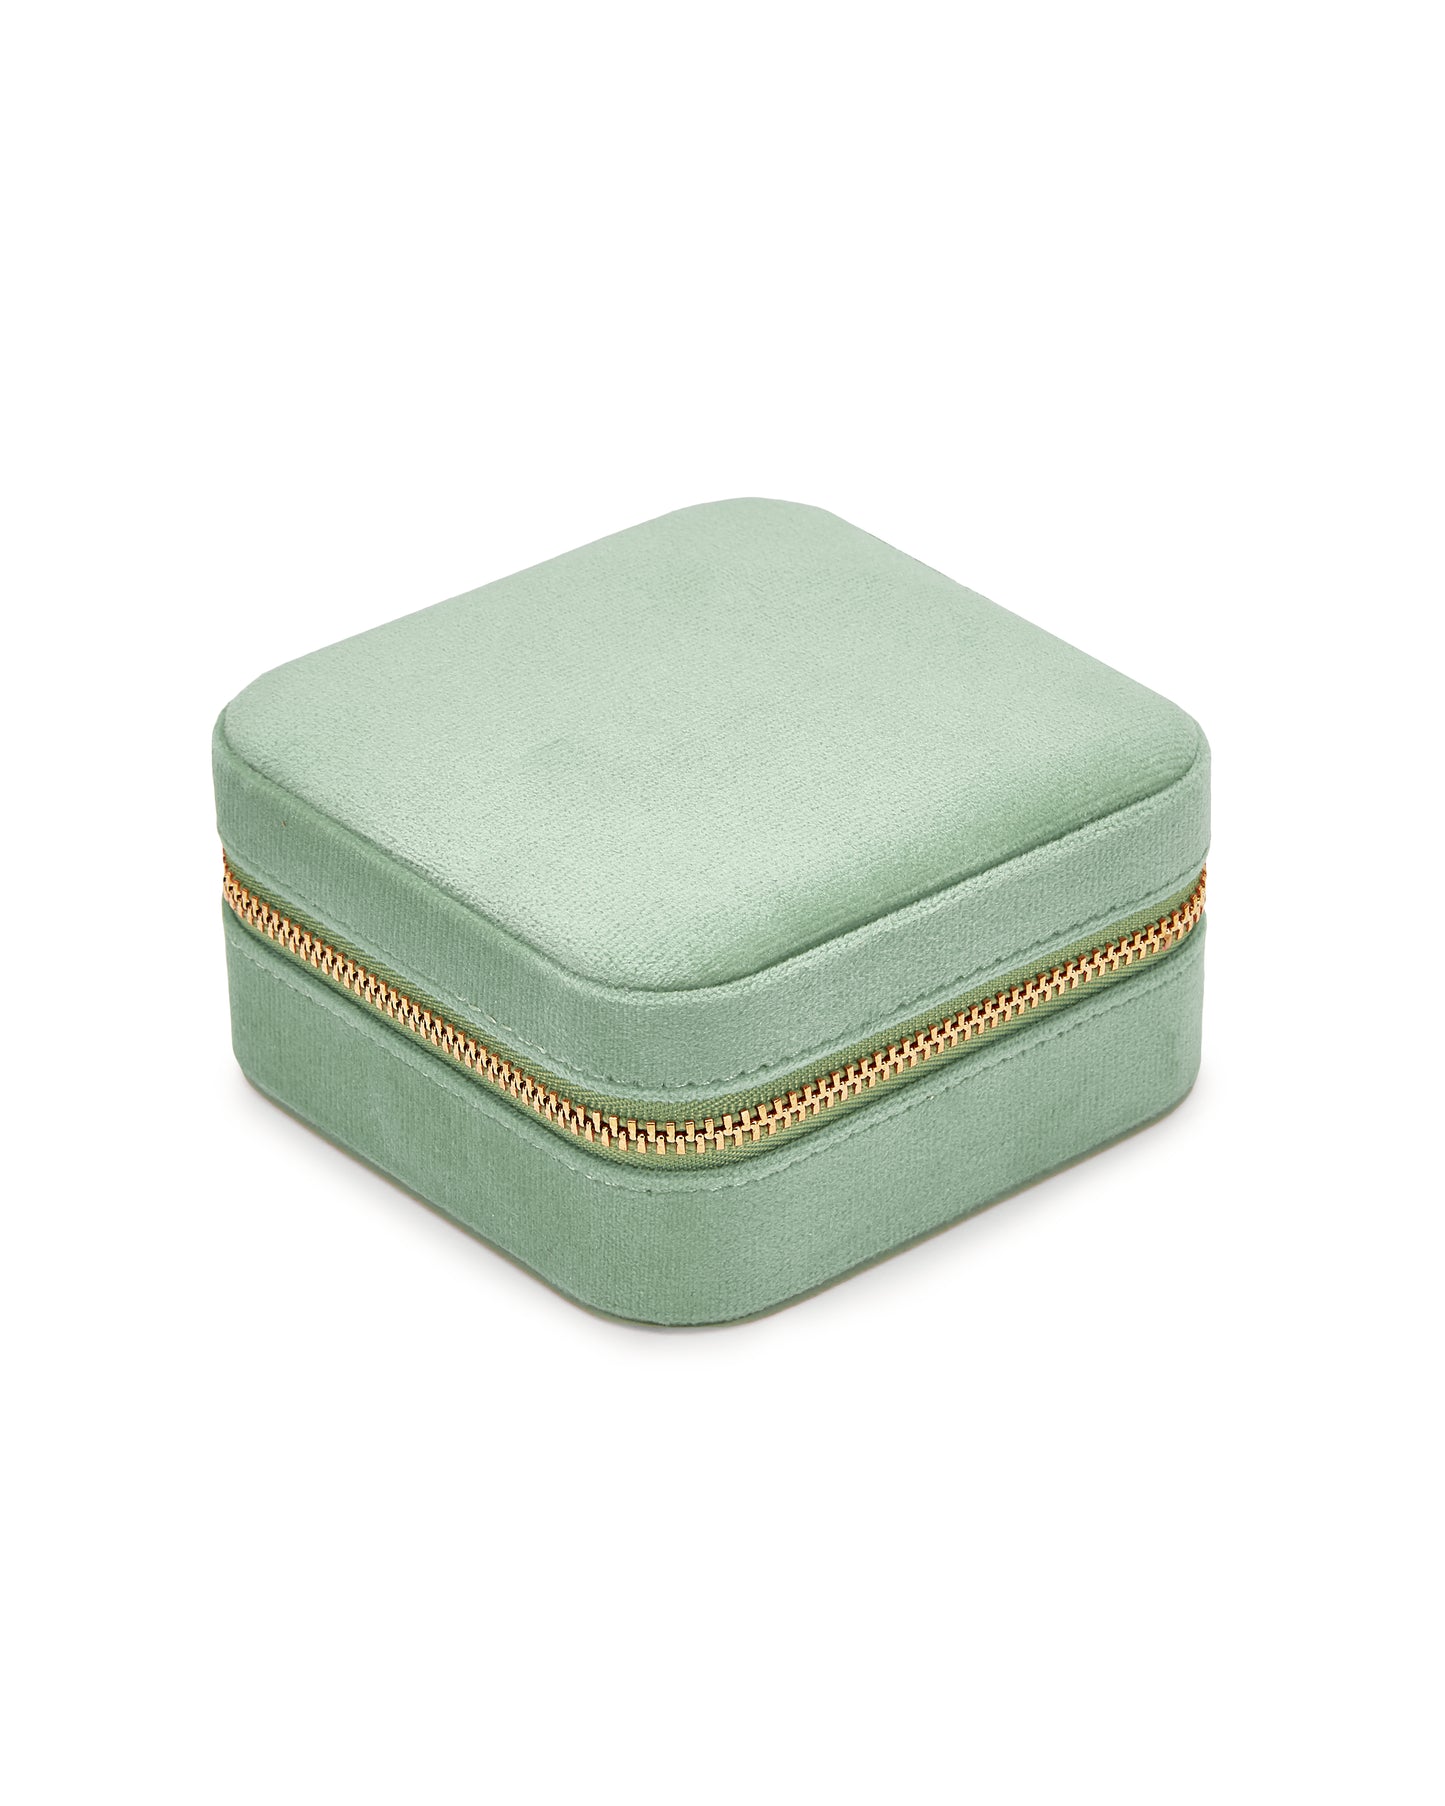 VELVET JEWELRY BOX col. pastel green, directly orderable - 5 pieces